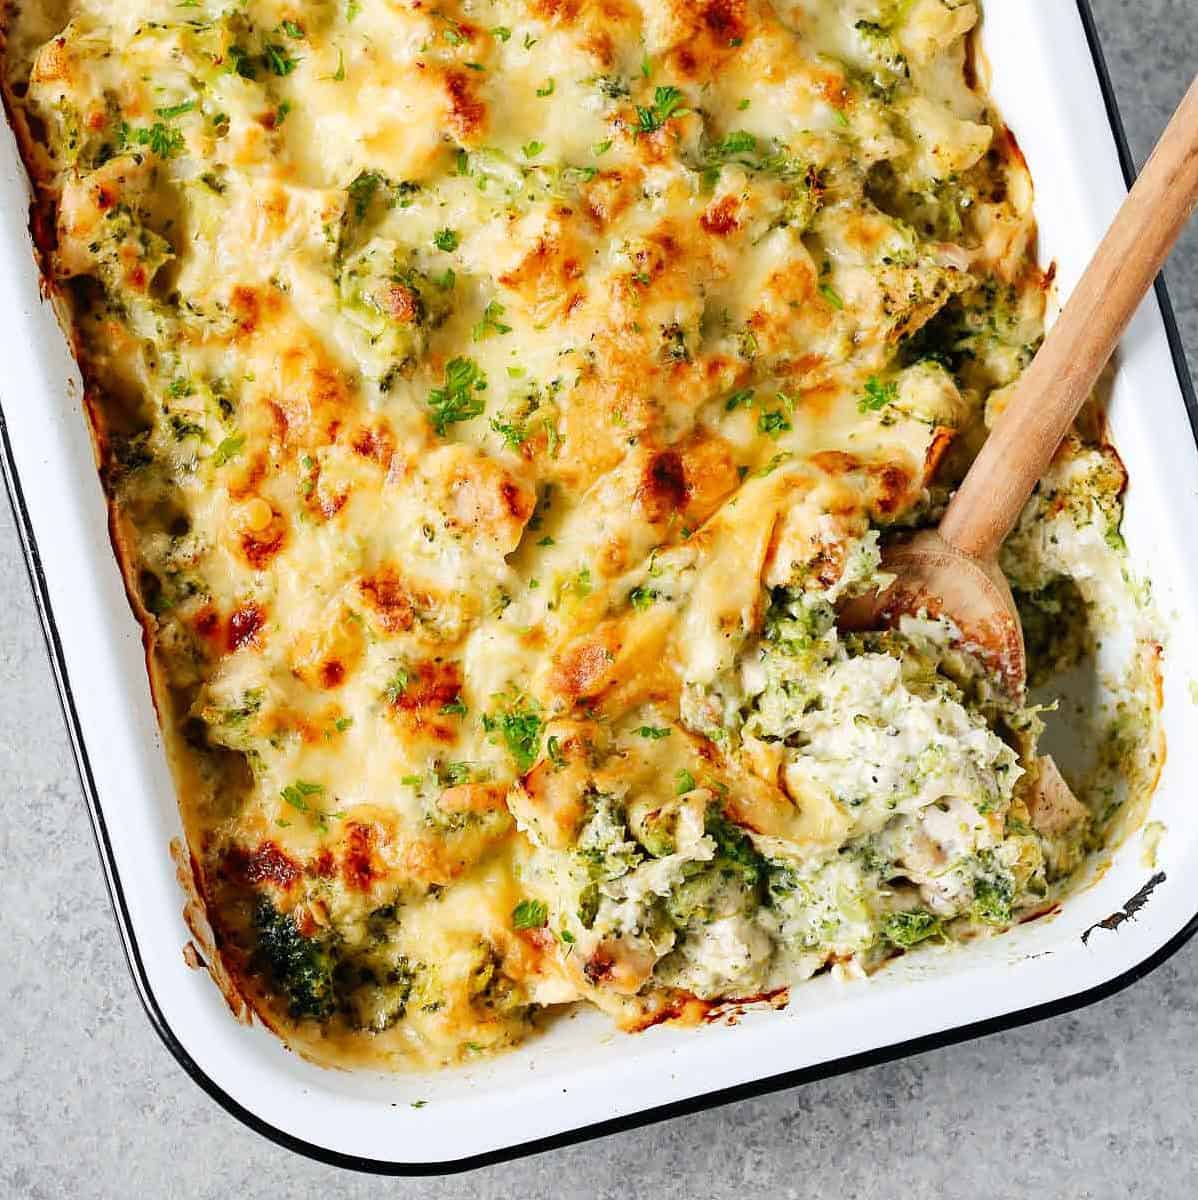  One spoonful of this vegan broccoli and cauliflower casserole and you'll be hooked.